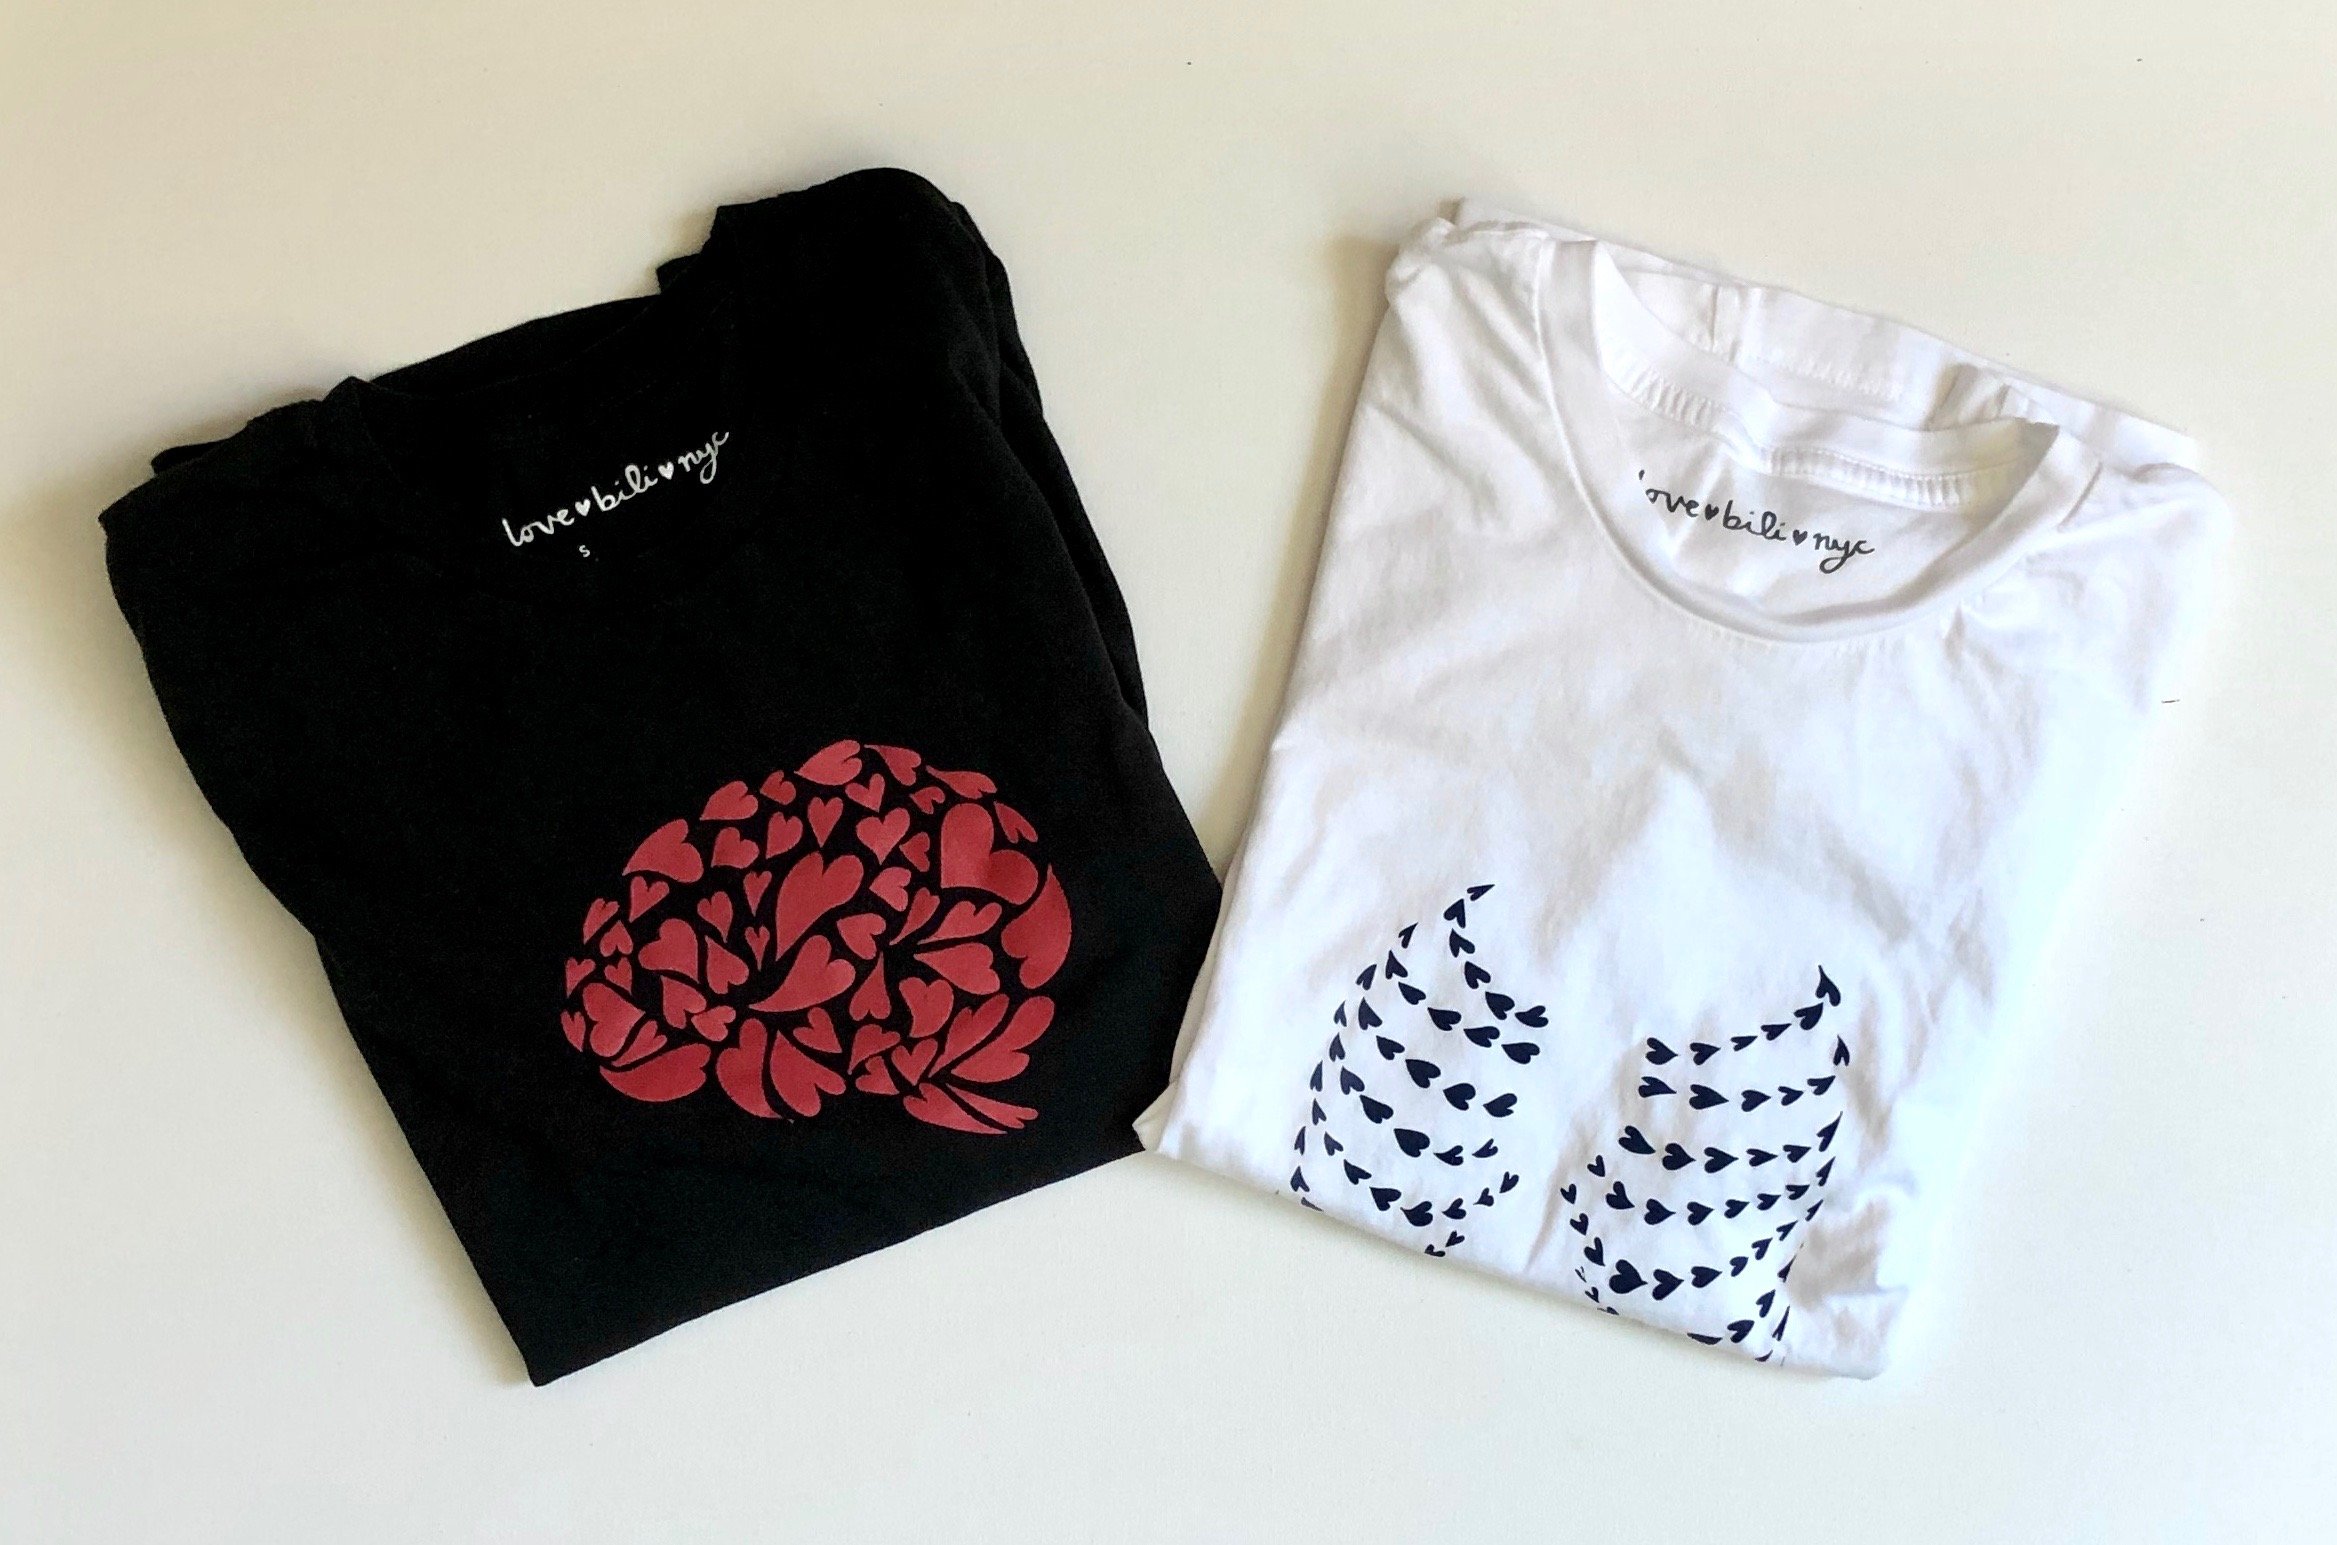 Two ♡bili shirts folded next to each other. The shirt on the left is black with a red brain design made of hearts. The shirt on the right is white with a black ribcage design made of hearts